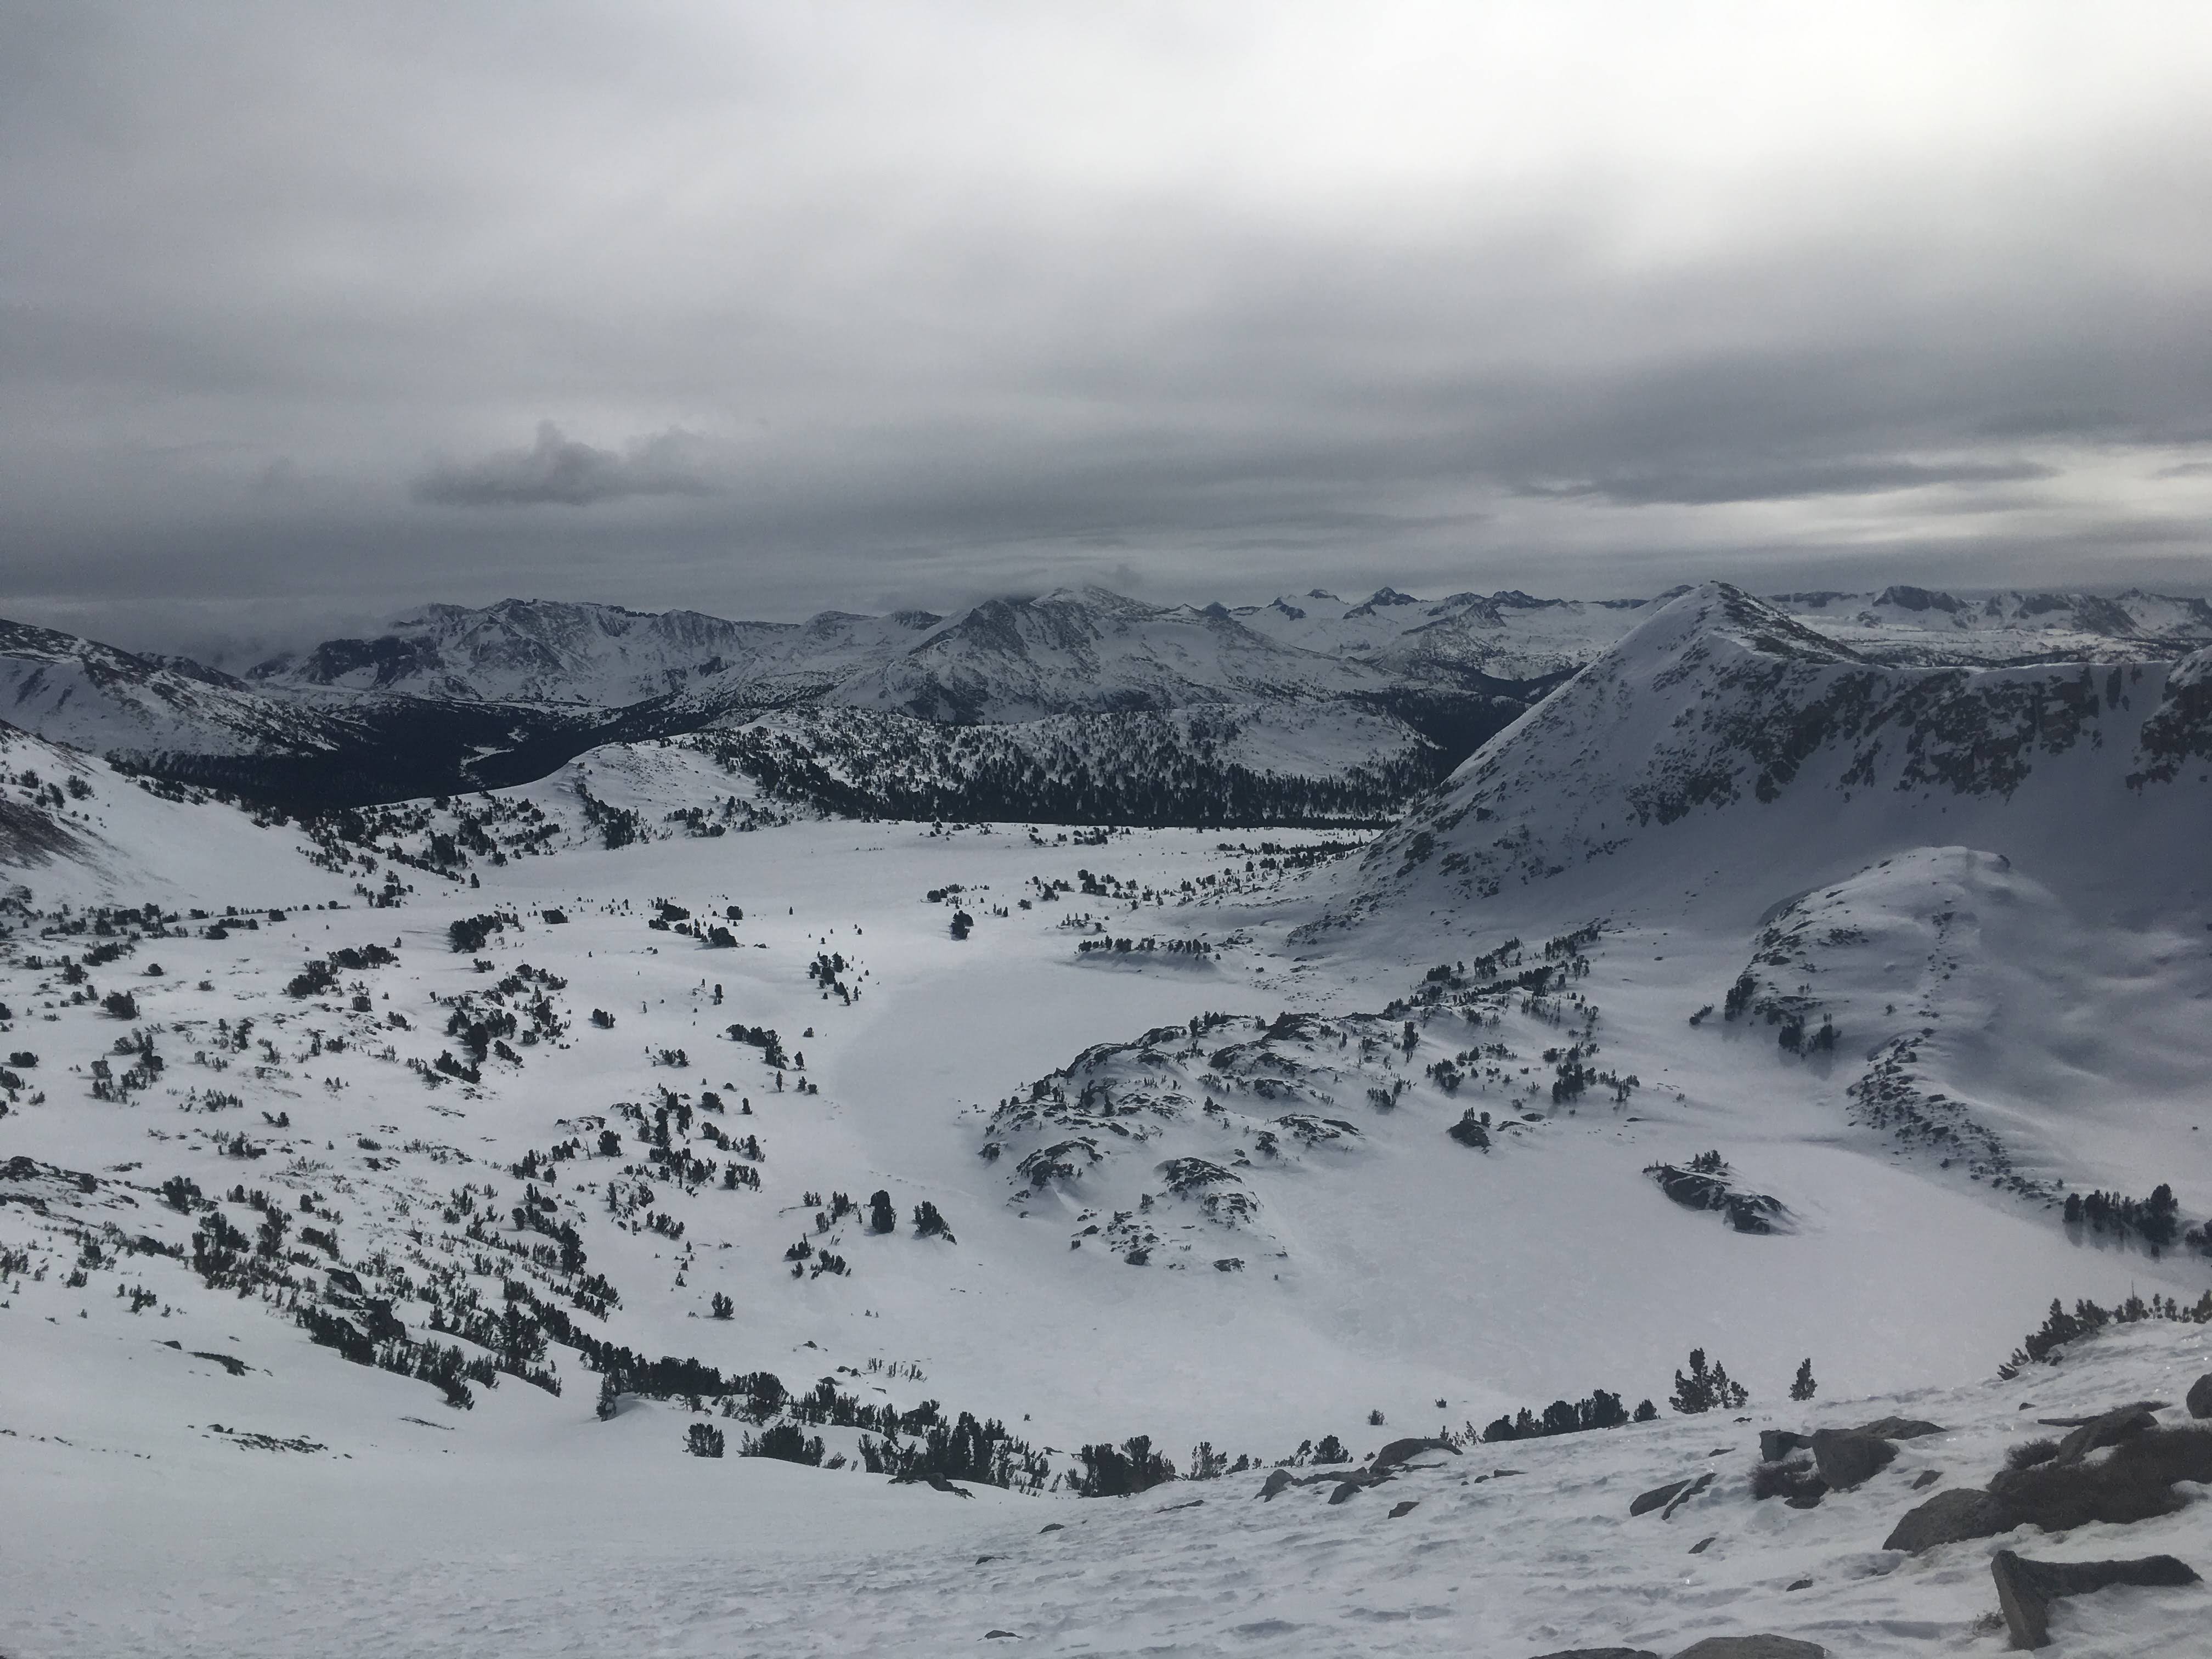 A wide view of a snowy basin under the cloud-covered sky